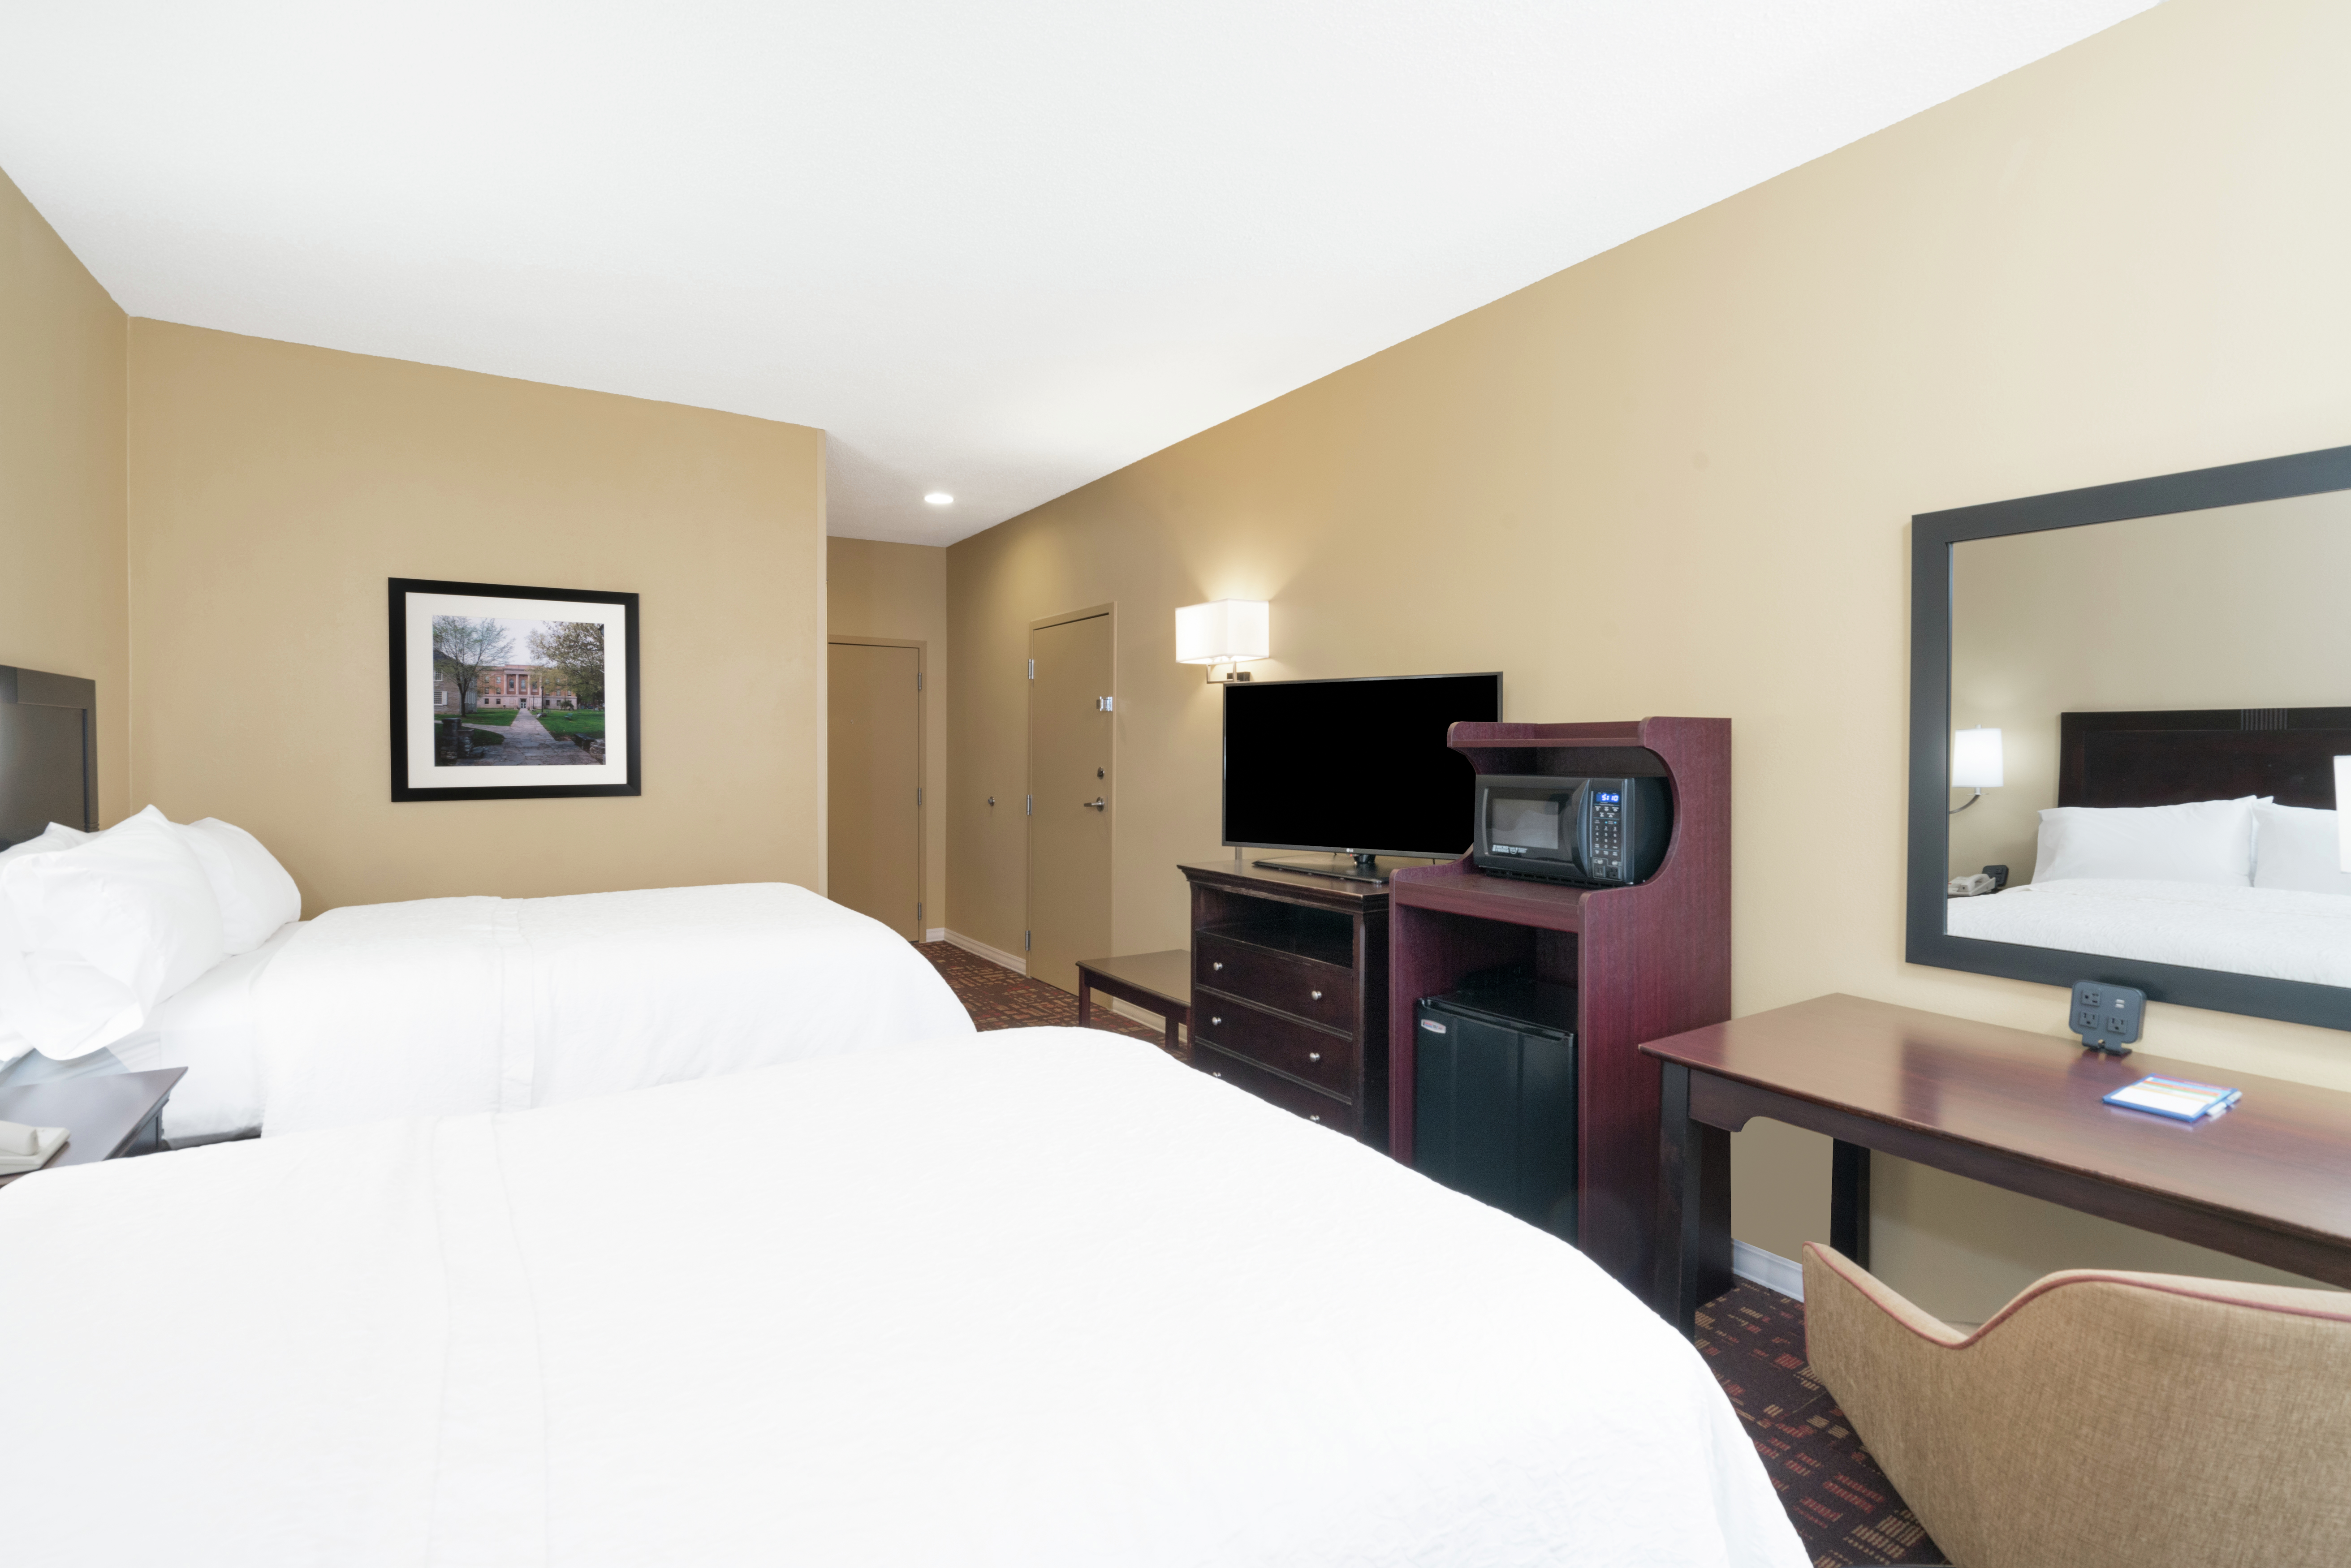 Two Double Beds, Entry, TV, Hospitality Center, and Work Desk in Guest Room